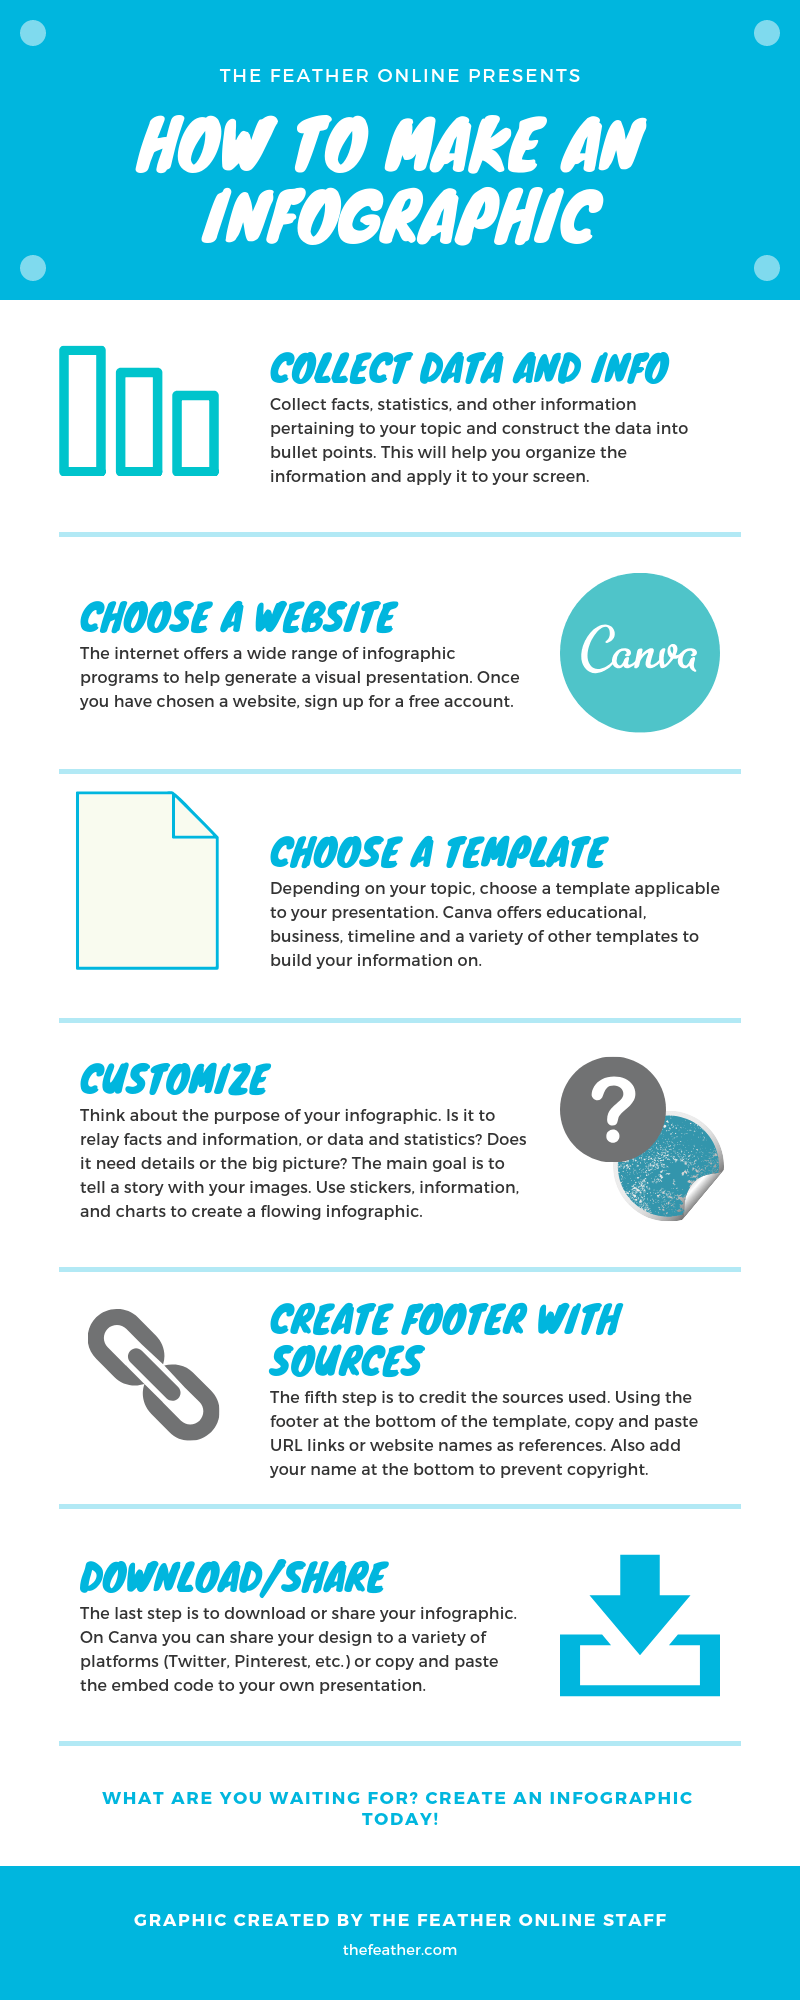 Free Online Infographic Maker by Canva